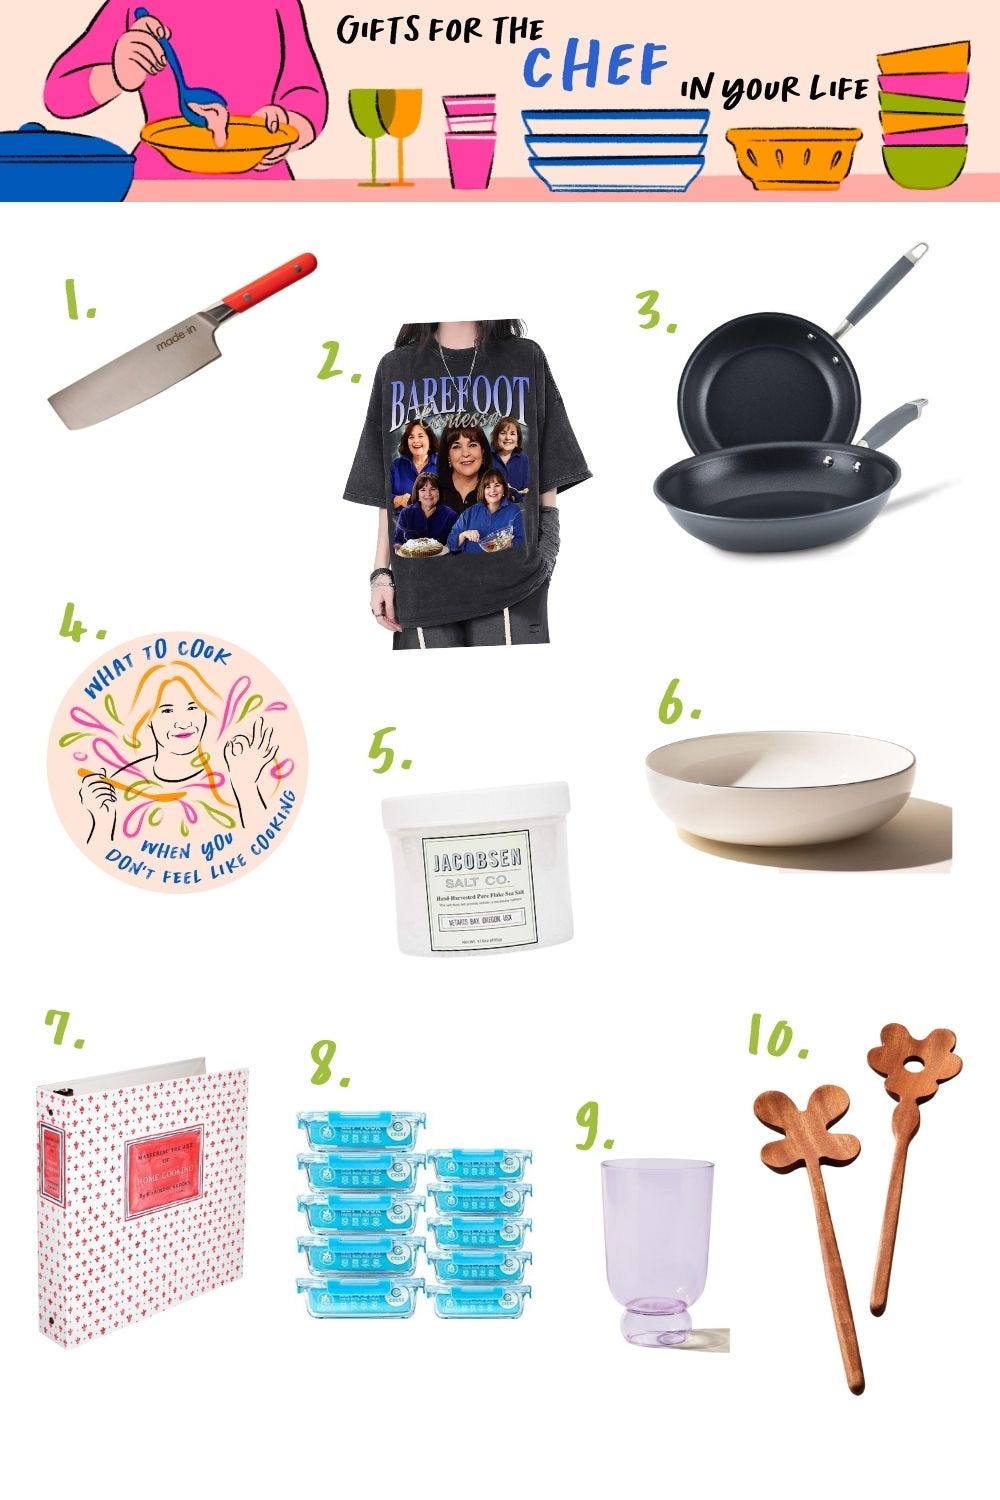 Pampered Chef - Still got some last-minute gifts to grab?